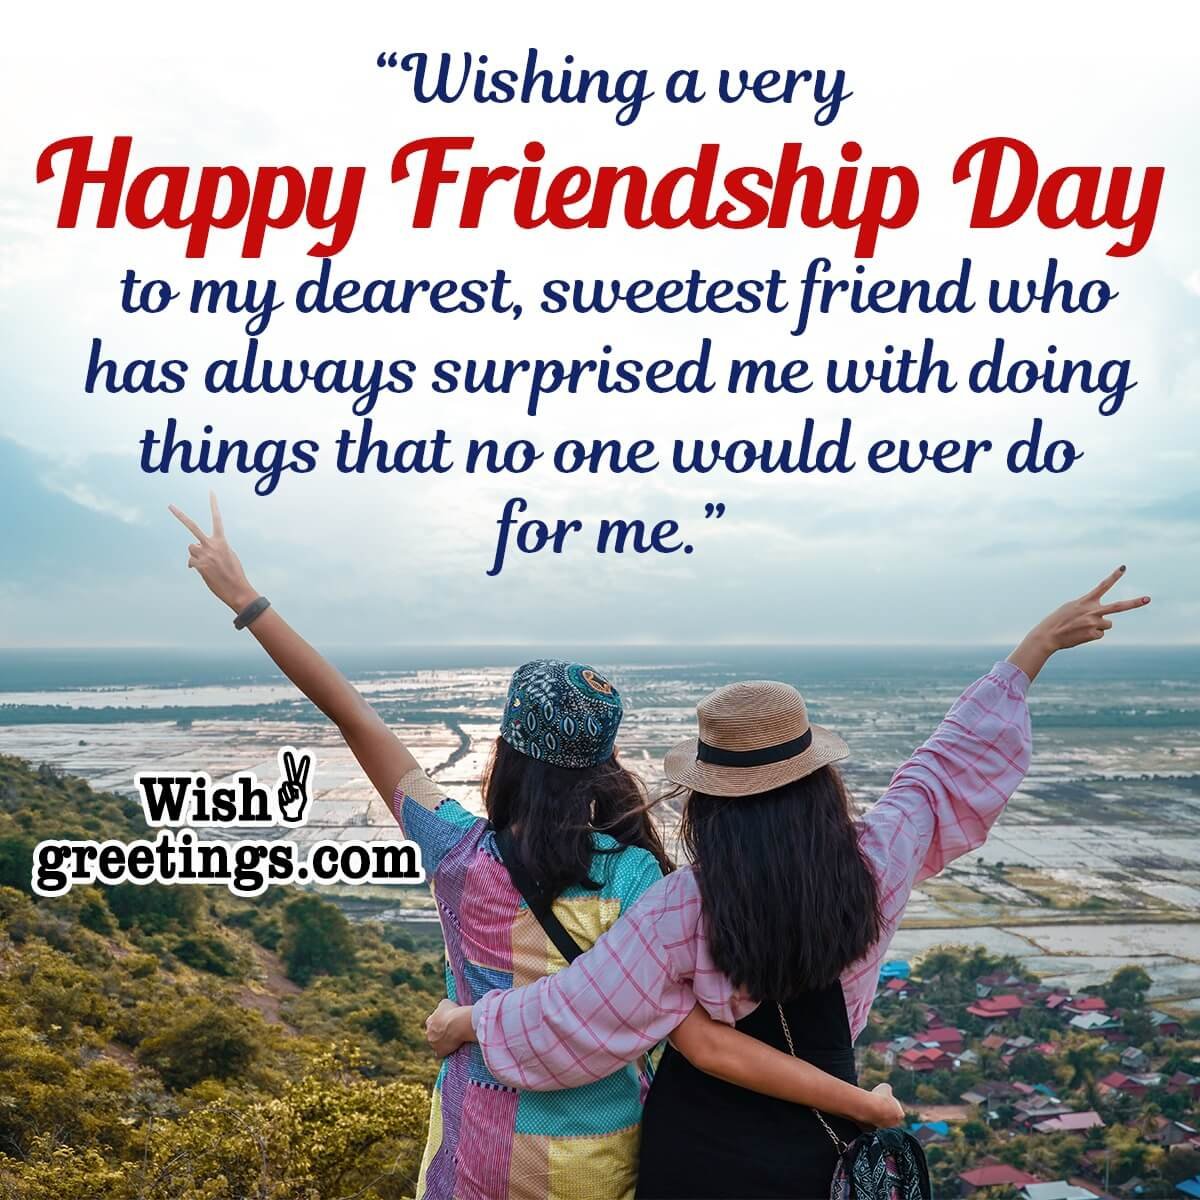 Friendship Day Wishes Messages - Wish Greetings